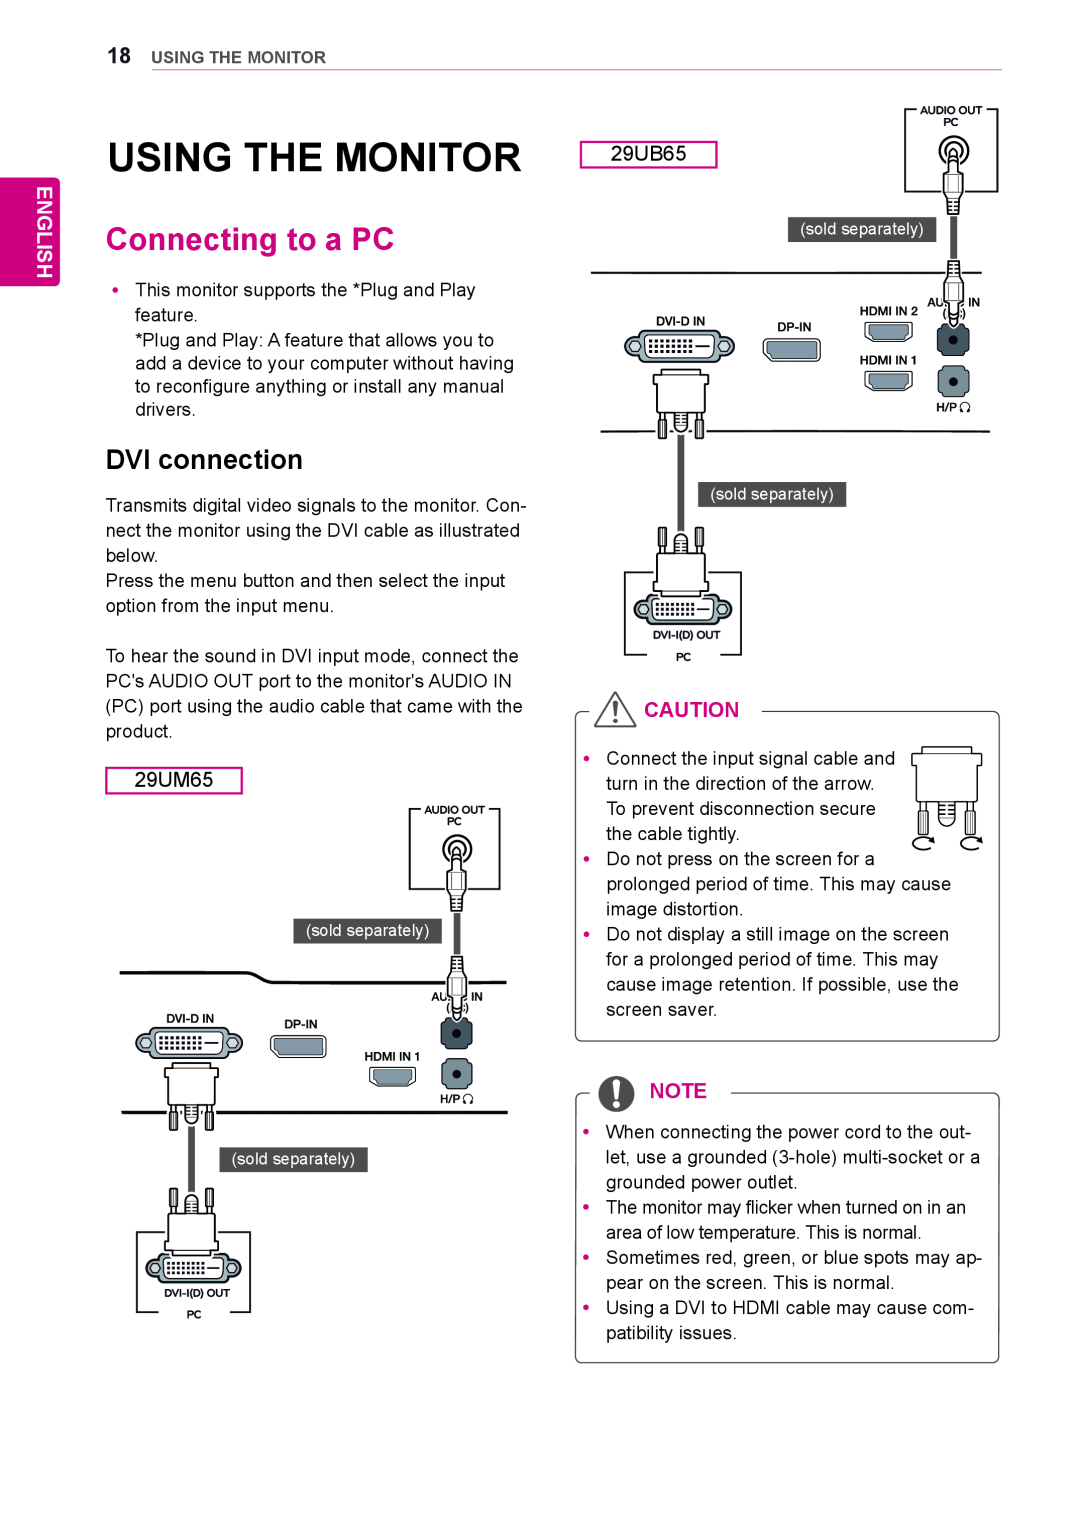 LG Electronics 29UB65, 29UM65 owner manual Using The Monitor, Connecting to a PC, DVI connection, English 